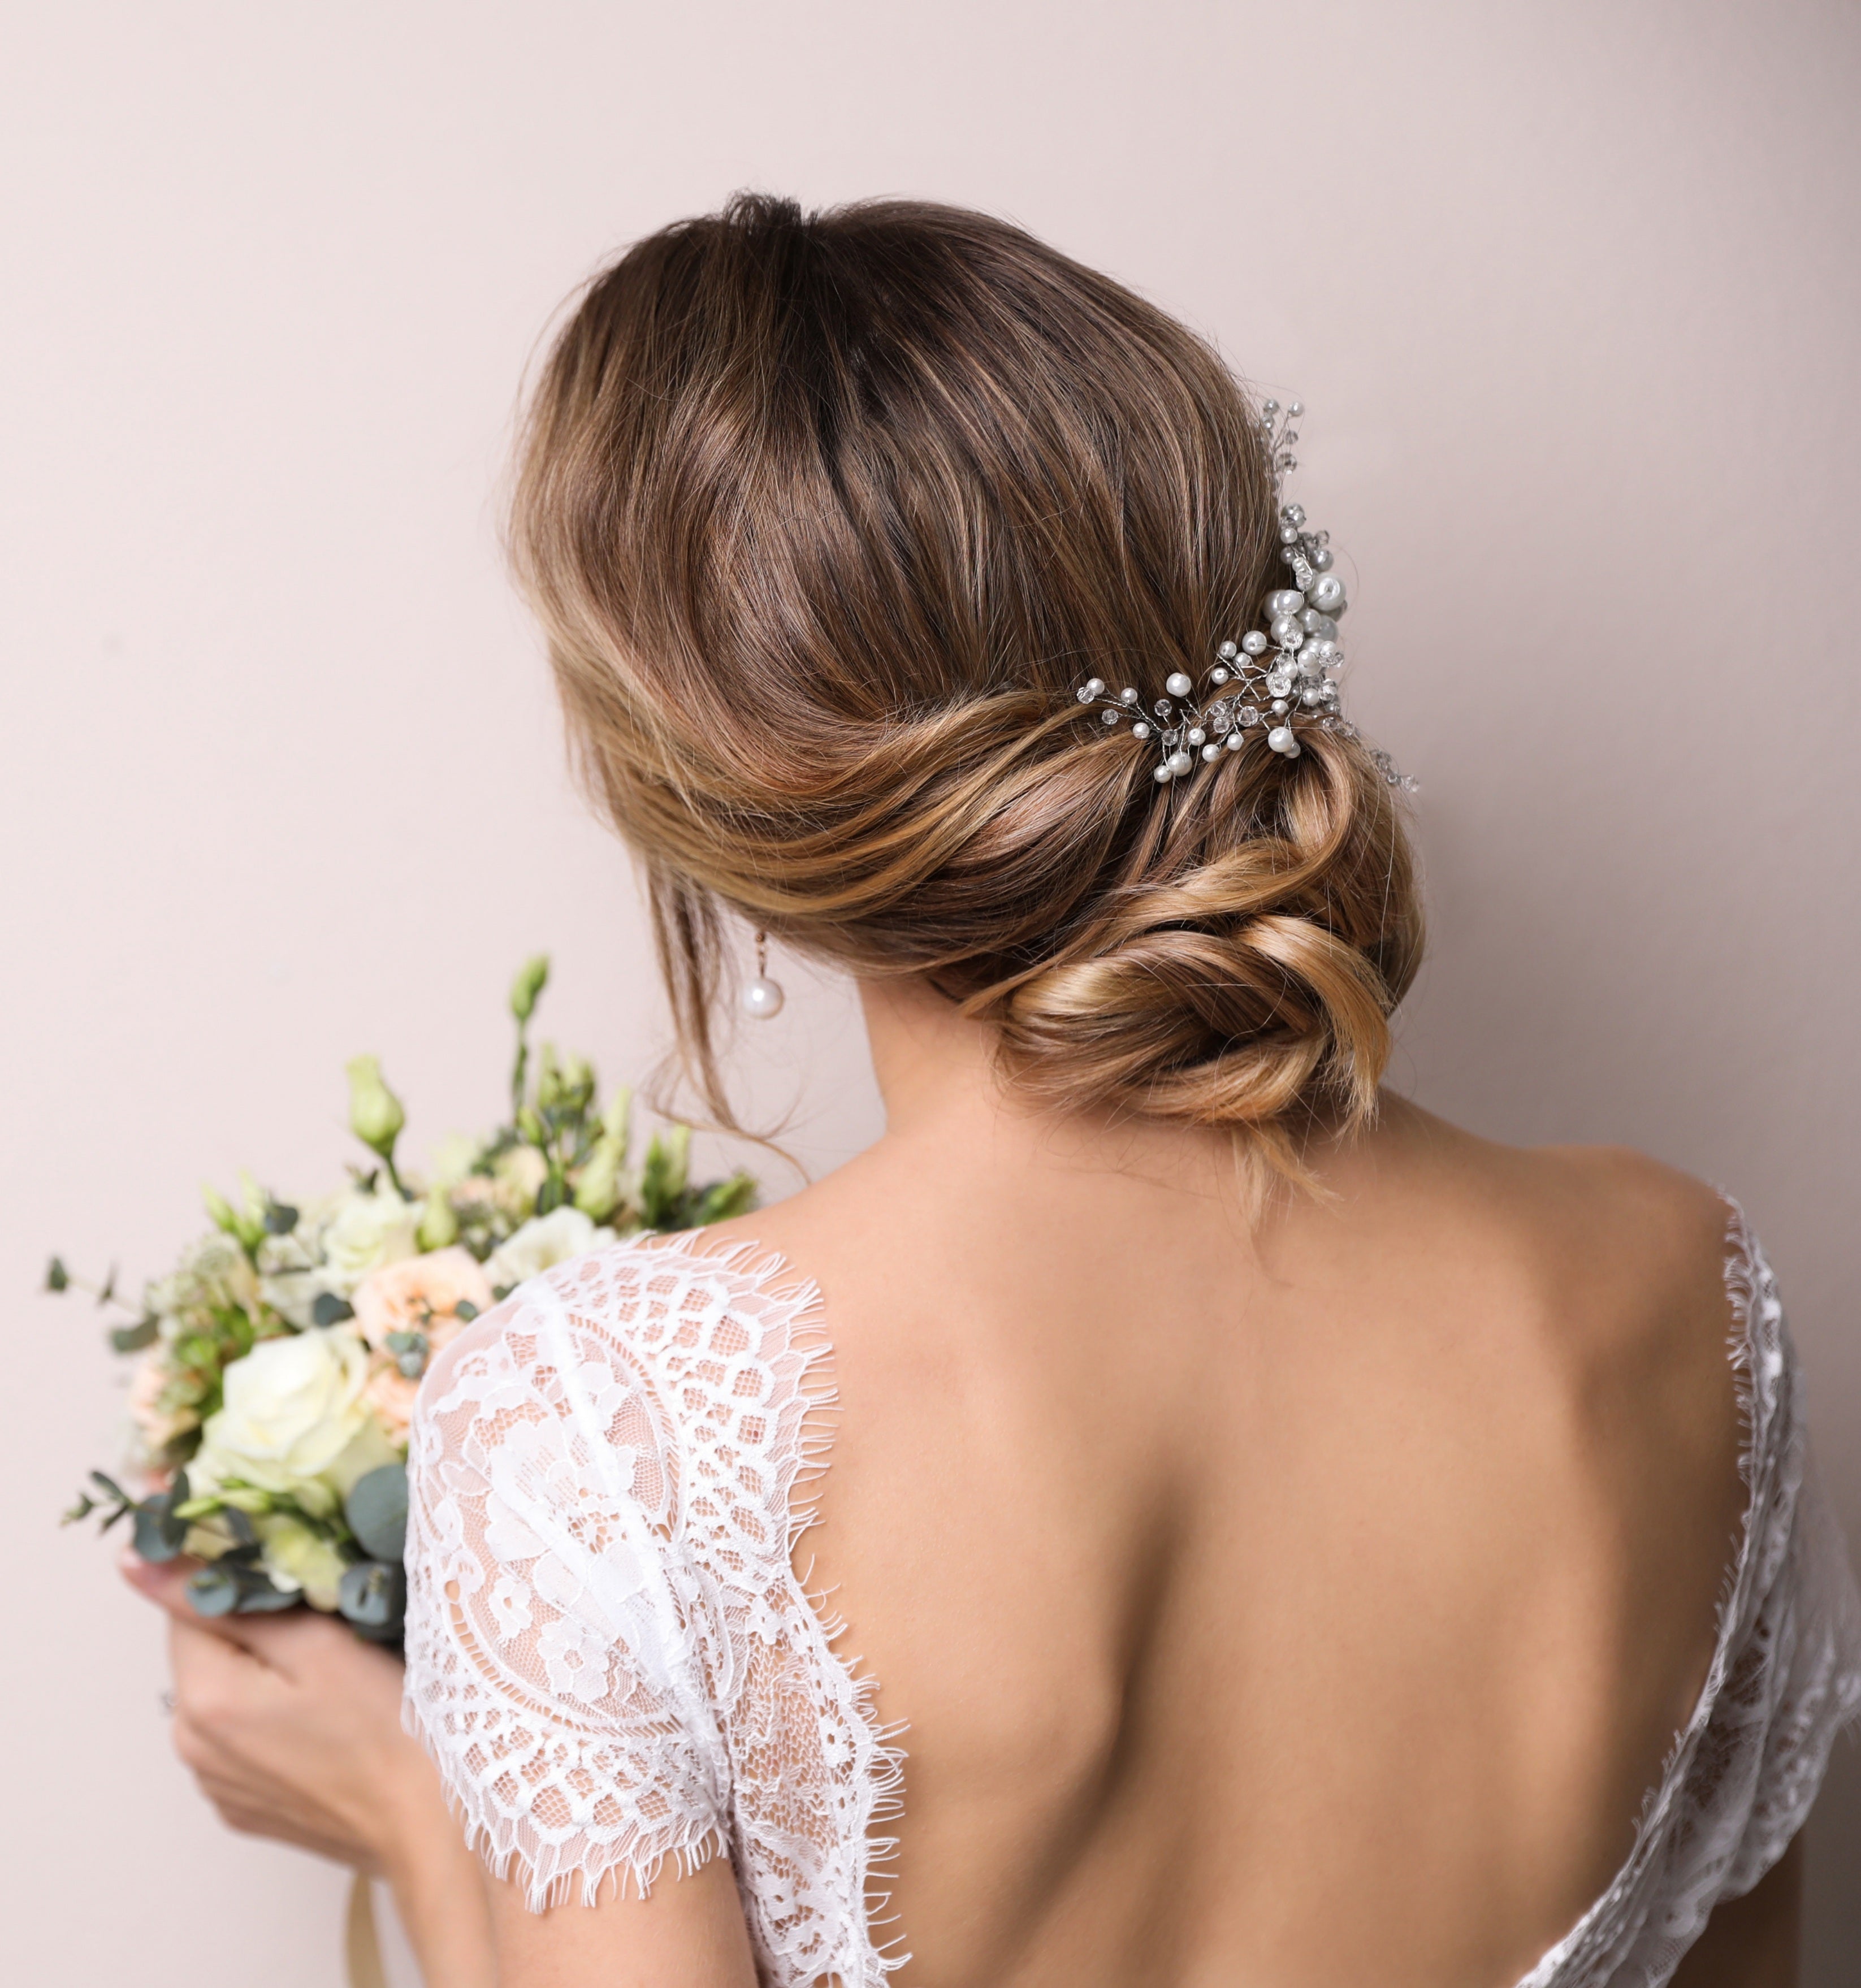 How to Choose Your Wedding Hairstyle? – La Pasion Bridal